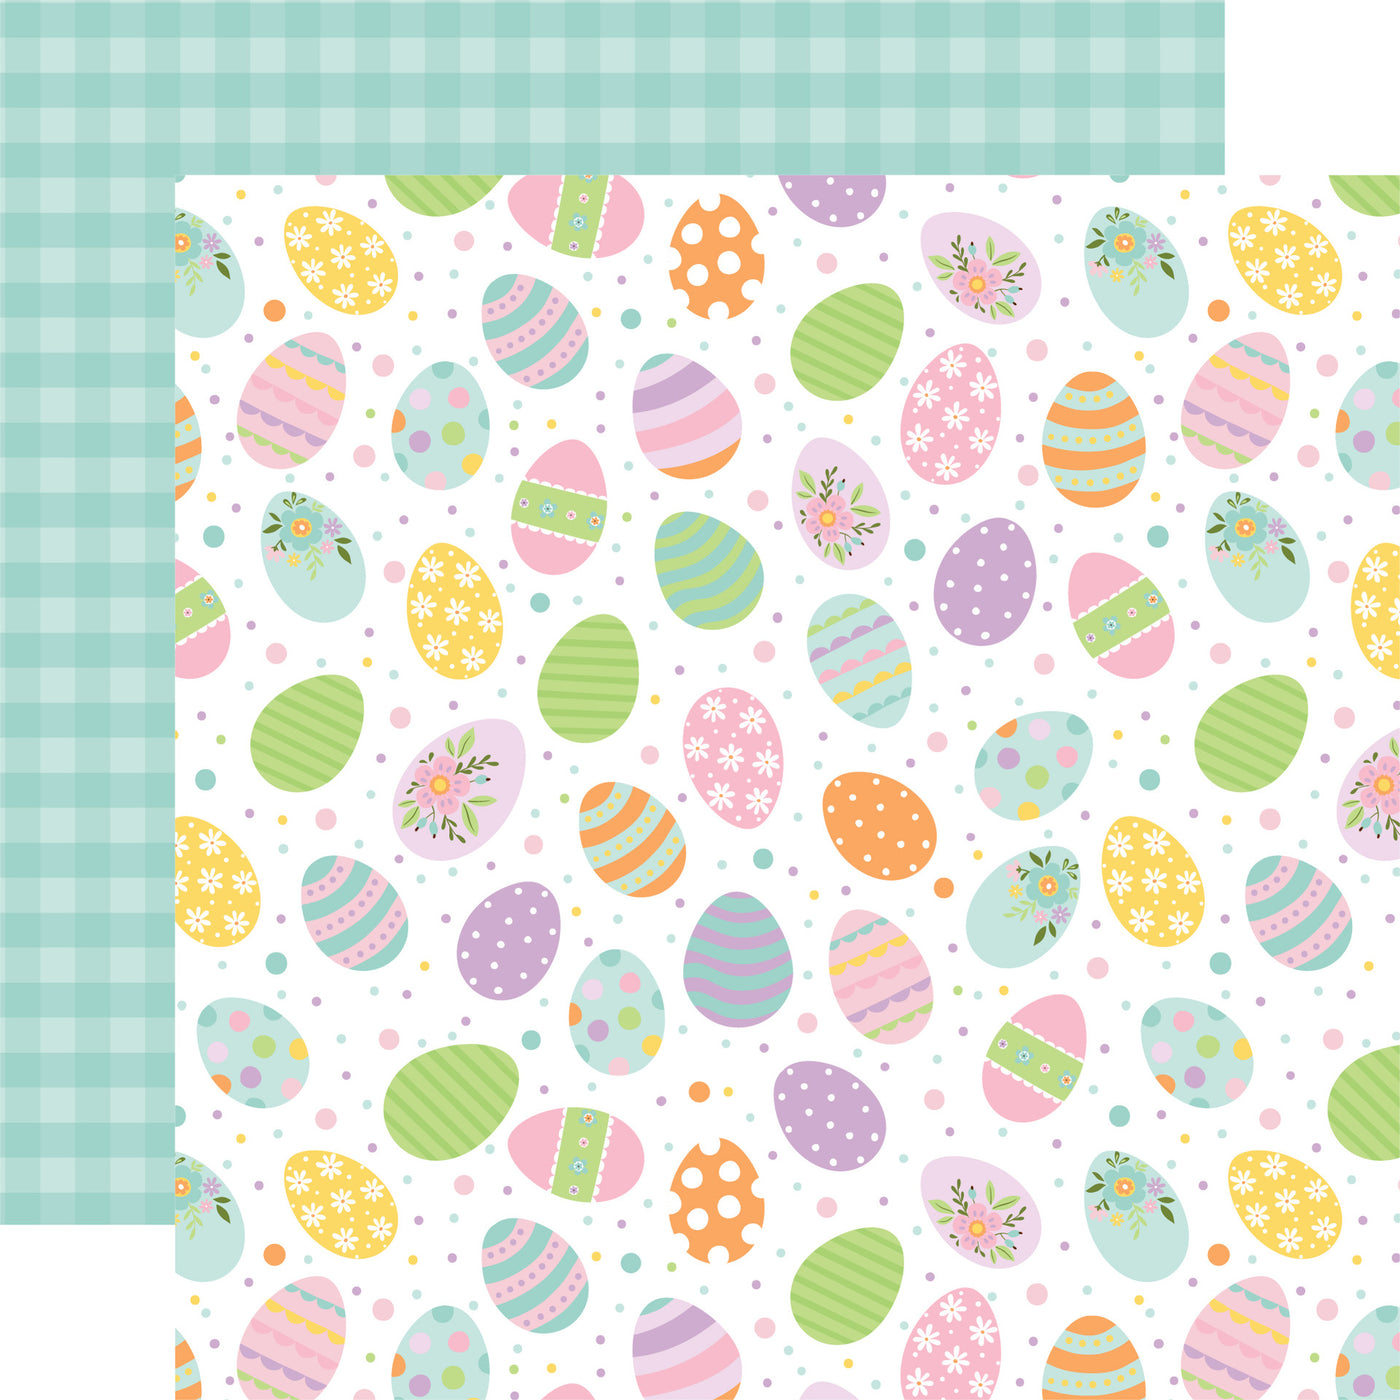 12x12 double-sided patterned paper - (pastel Easter eggs with scattered dots on a white background, teal blue gingham reverse)